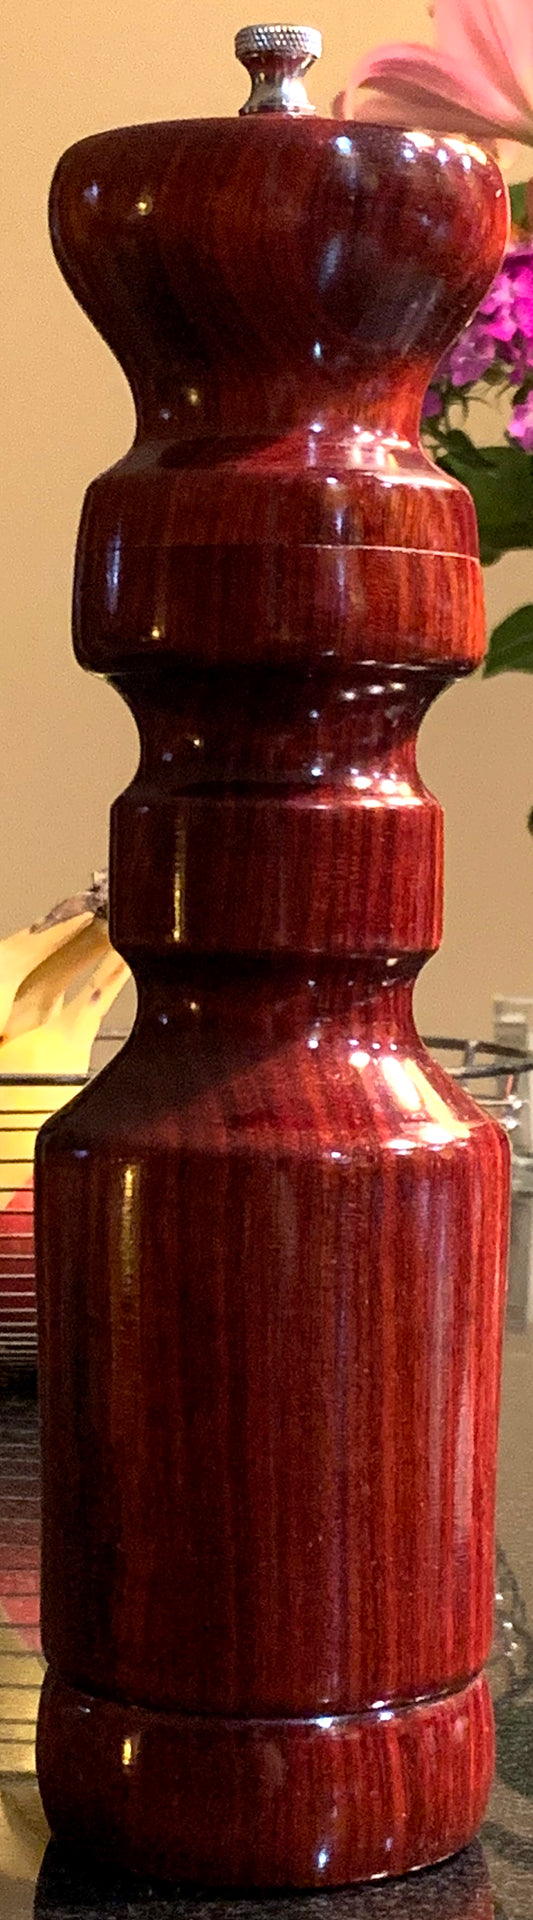 Peppermill in Bloodwood